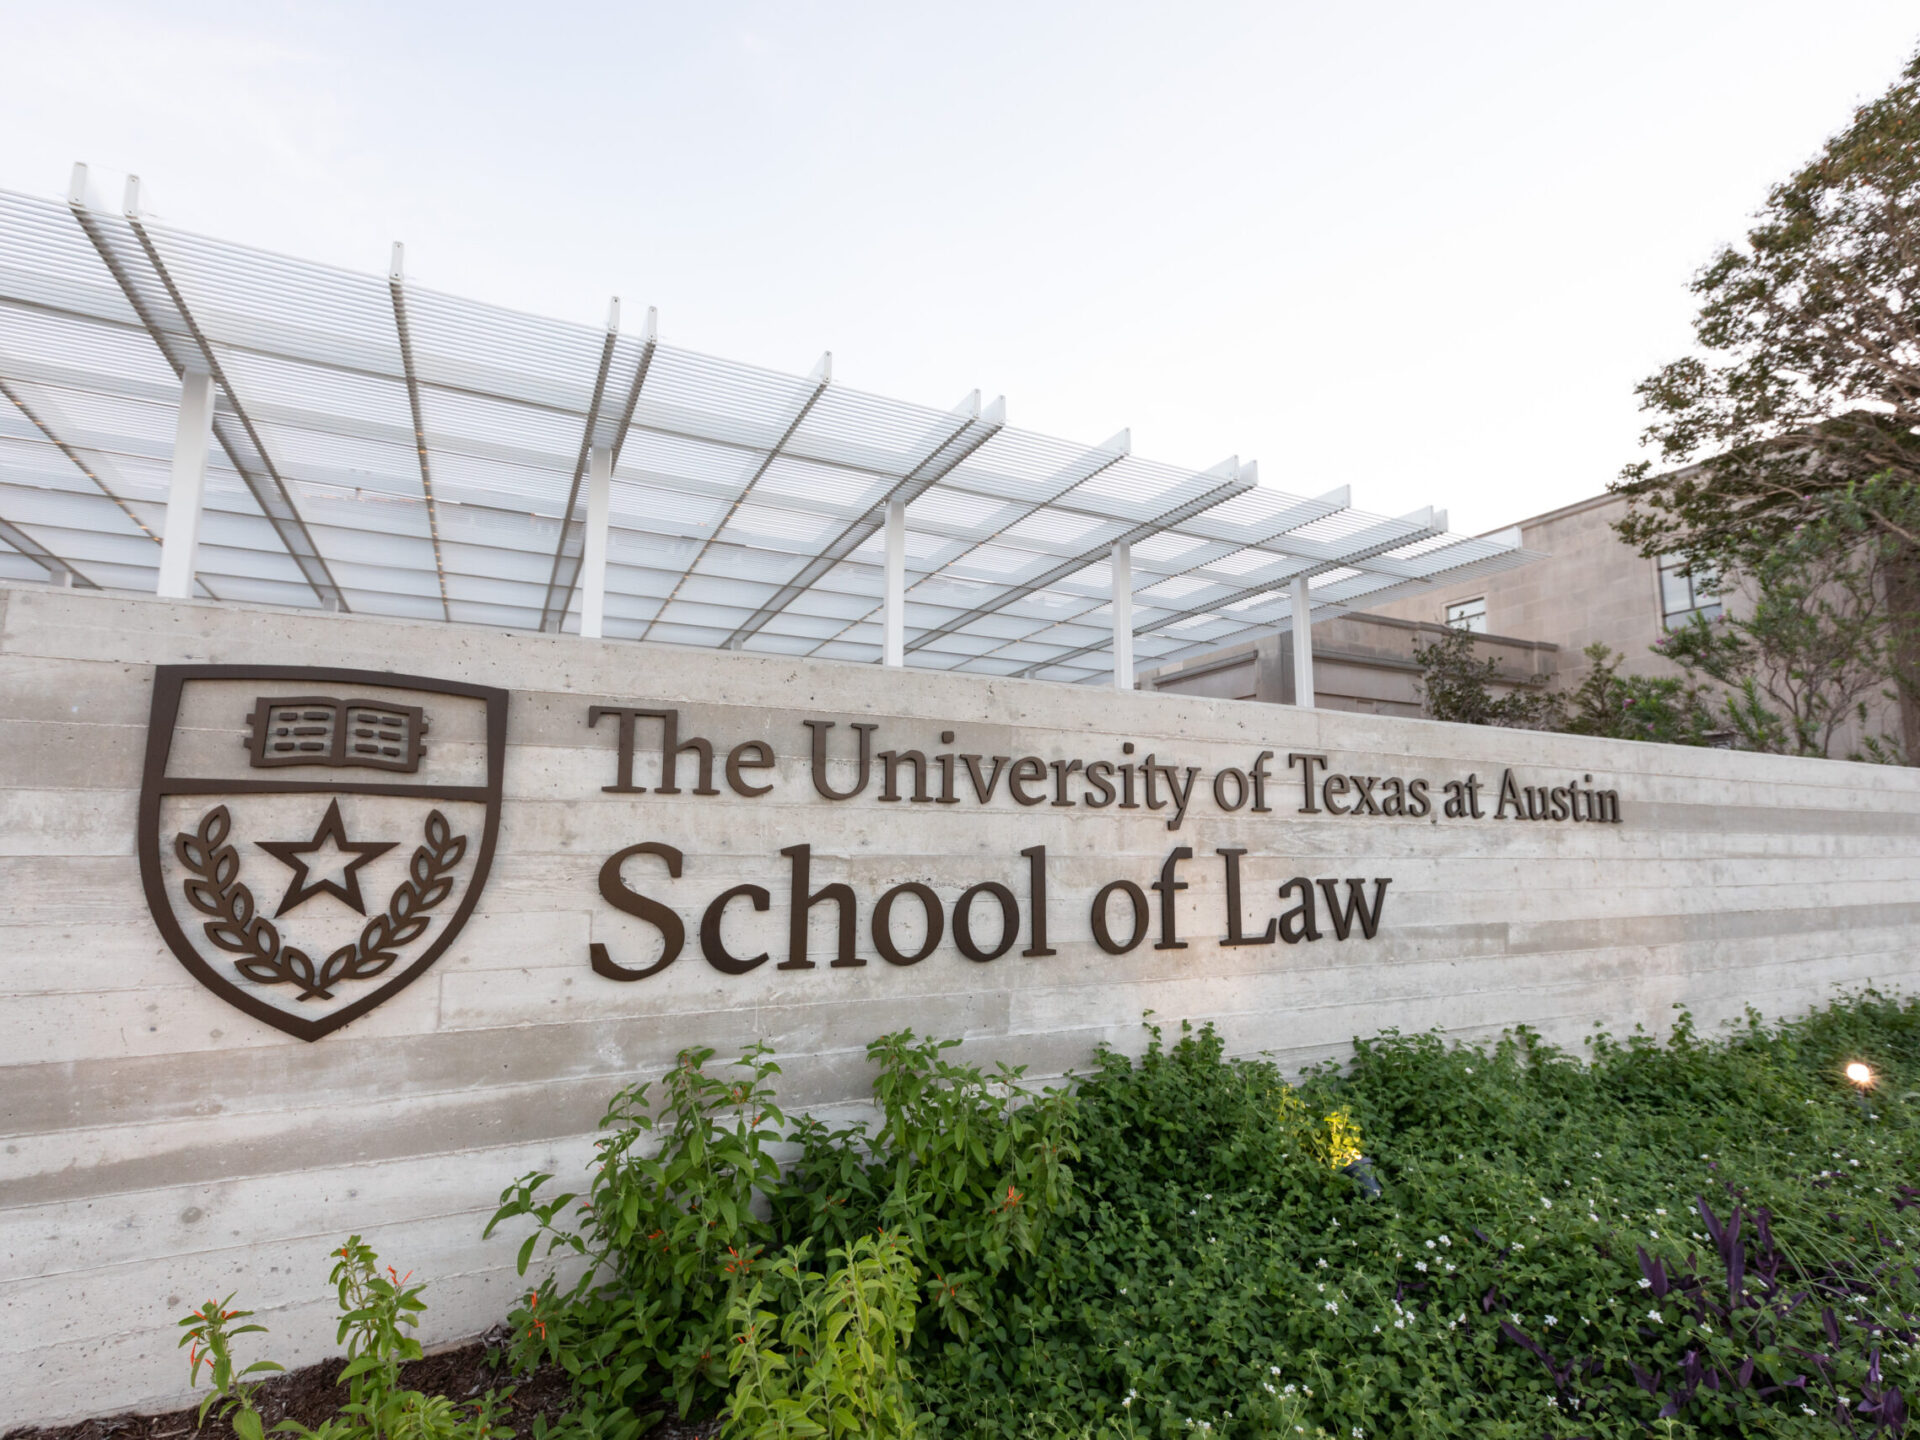 The University of Texas at Austin School of Law signage